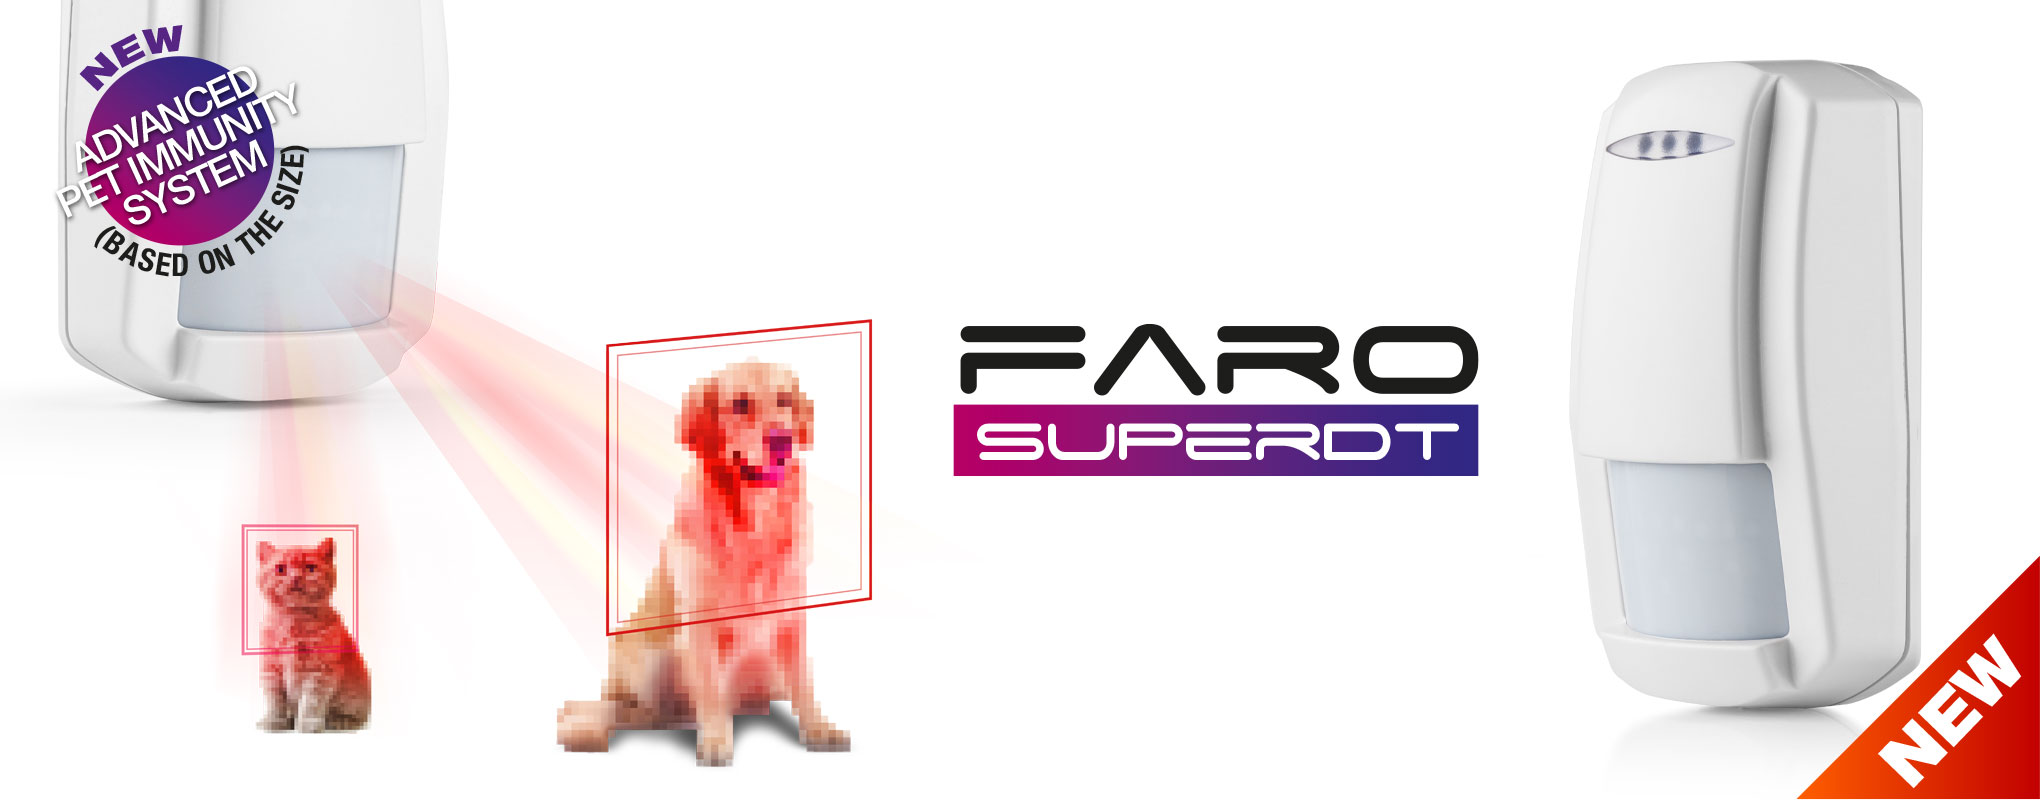 Faro SUPER DT | Dual technology motion detector with pet immunity